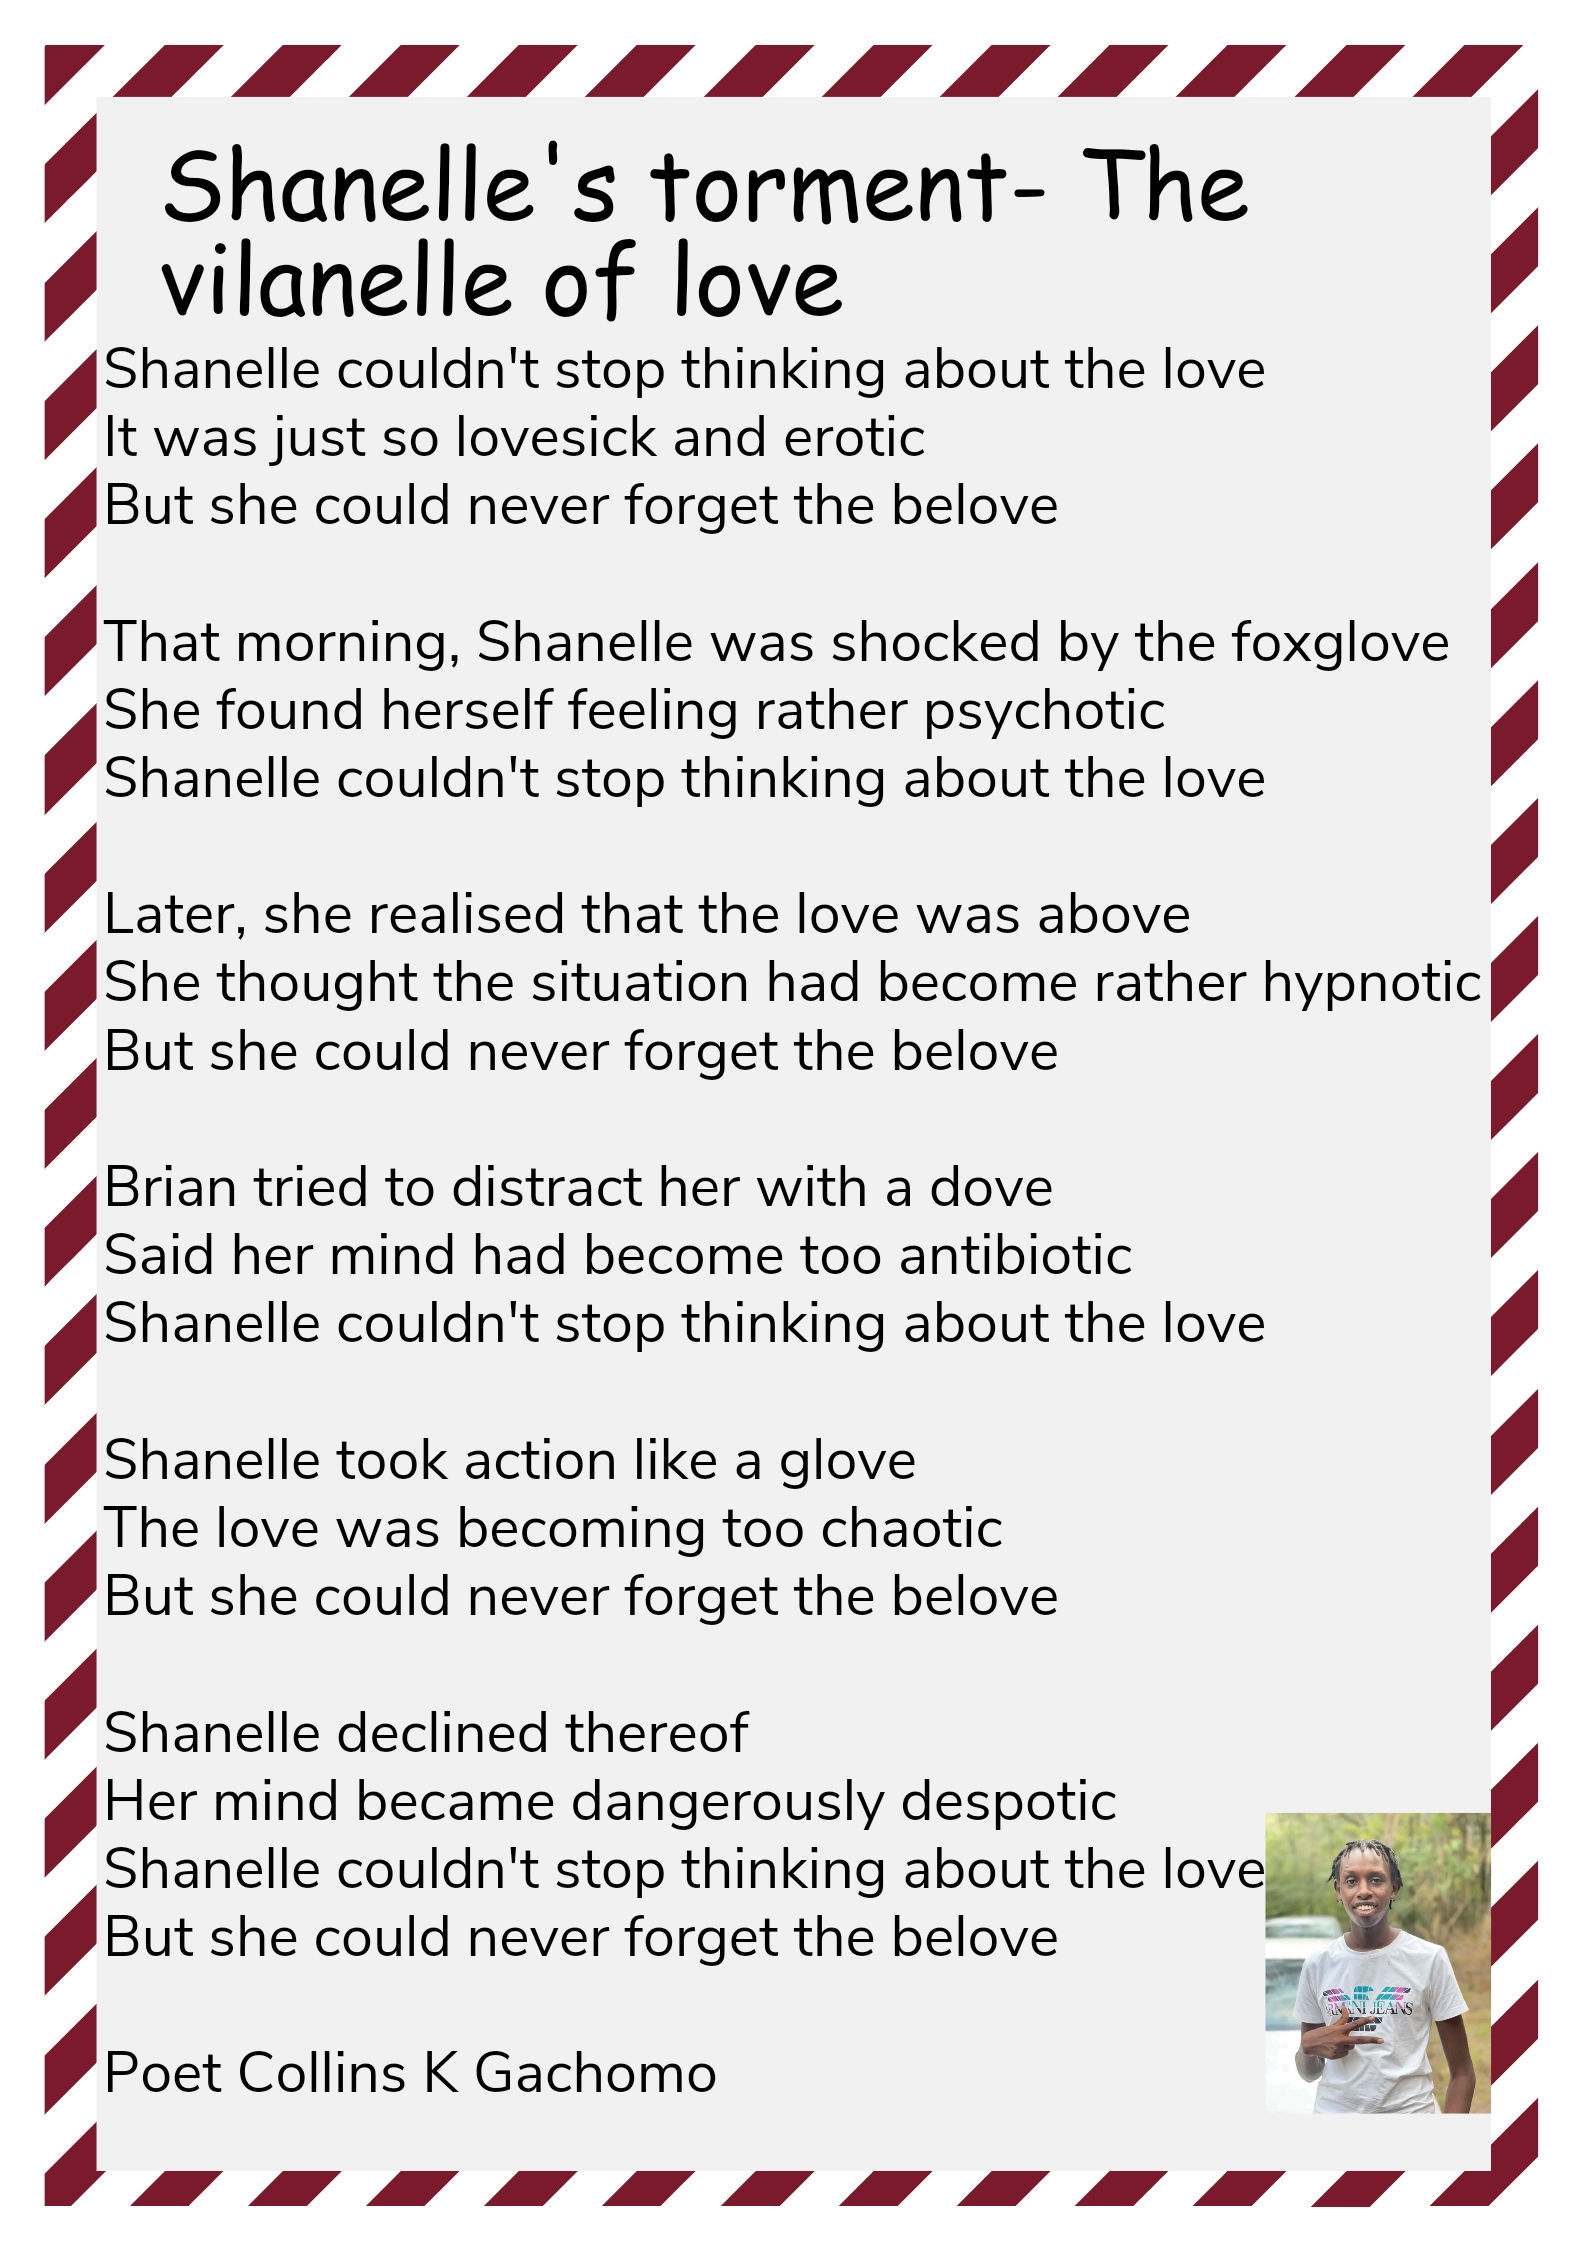 Shanelle's Torment - The Villanelle Of The Love